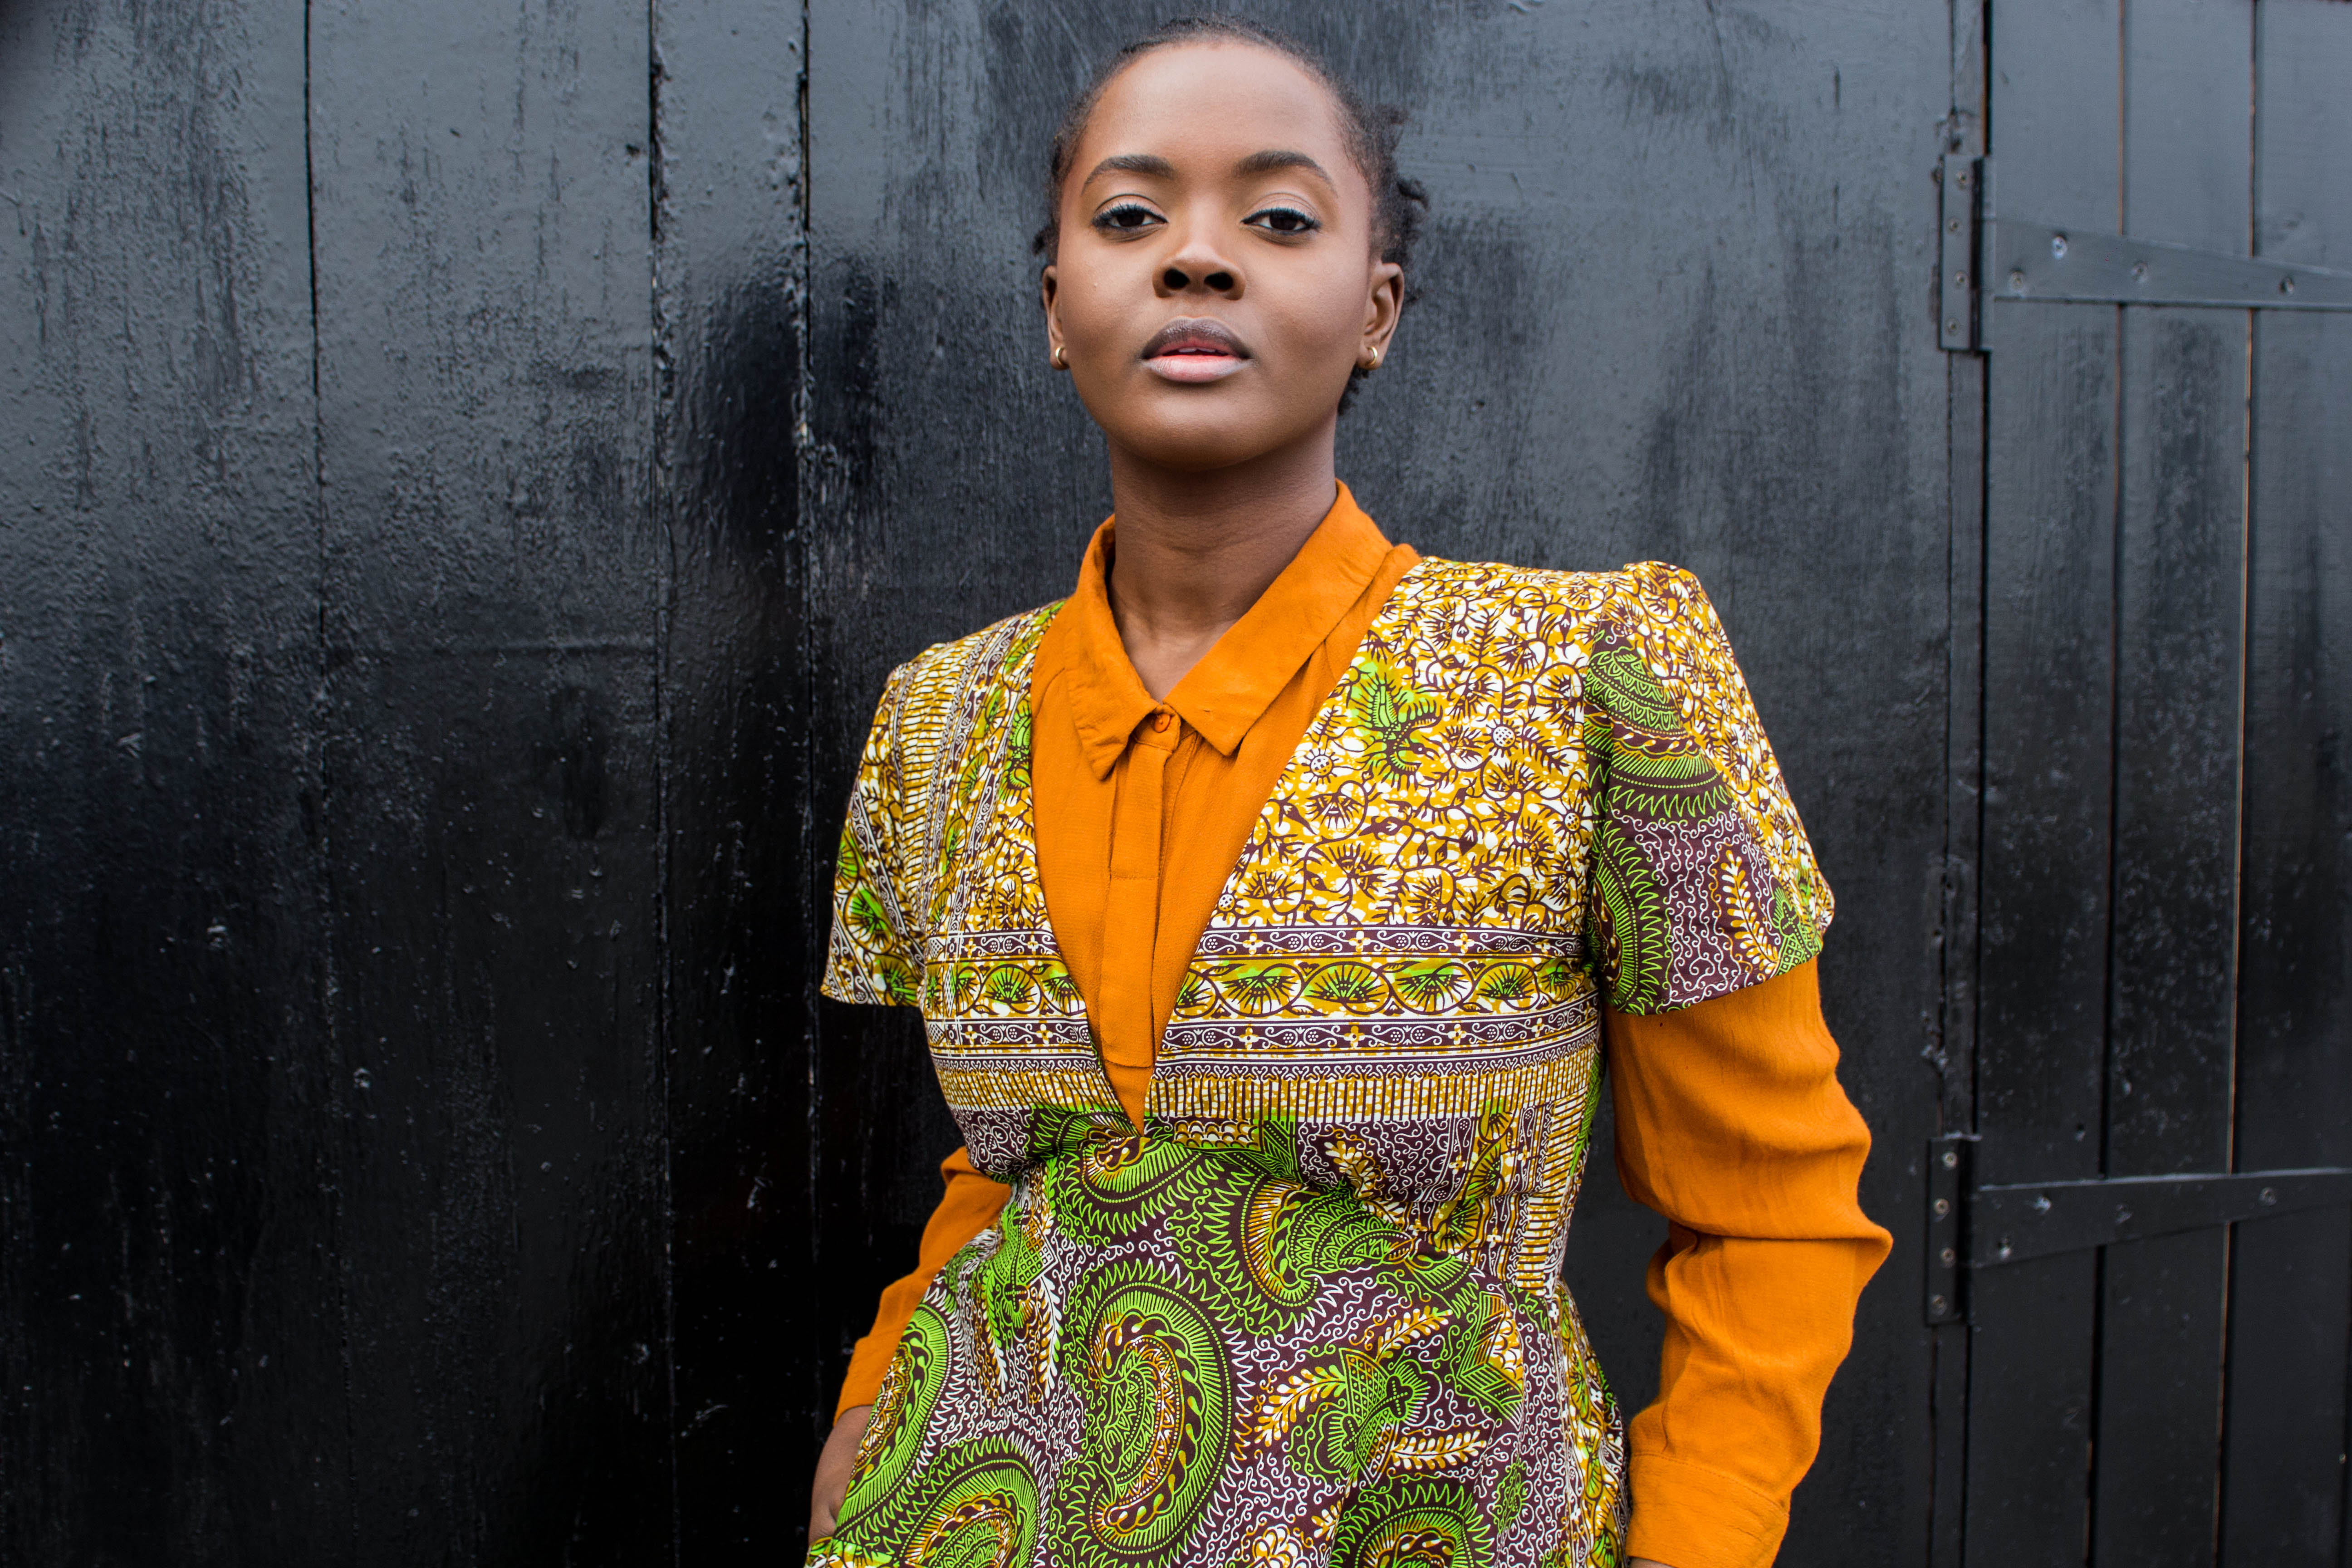 Philomena Kwao is the socially conscious black model we’ve been waiting for